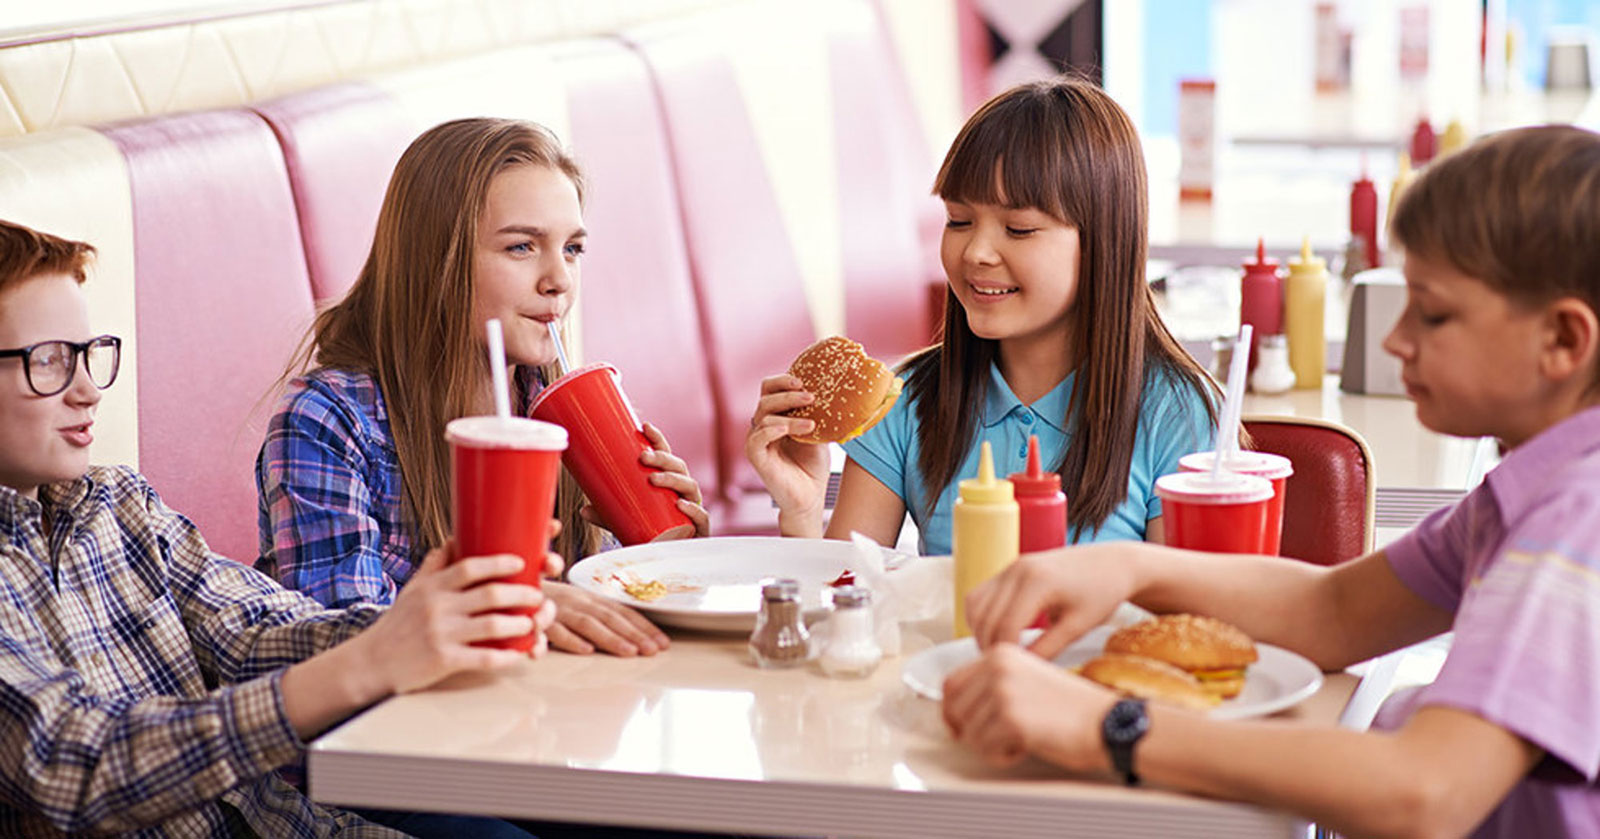 Teenagers Eating At Fast Food restaurant